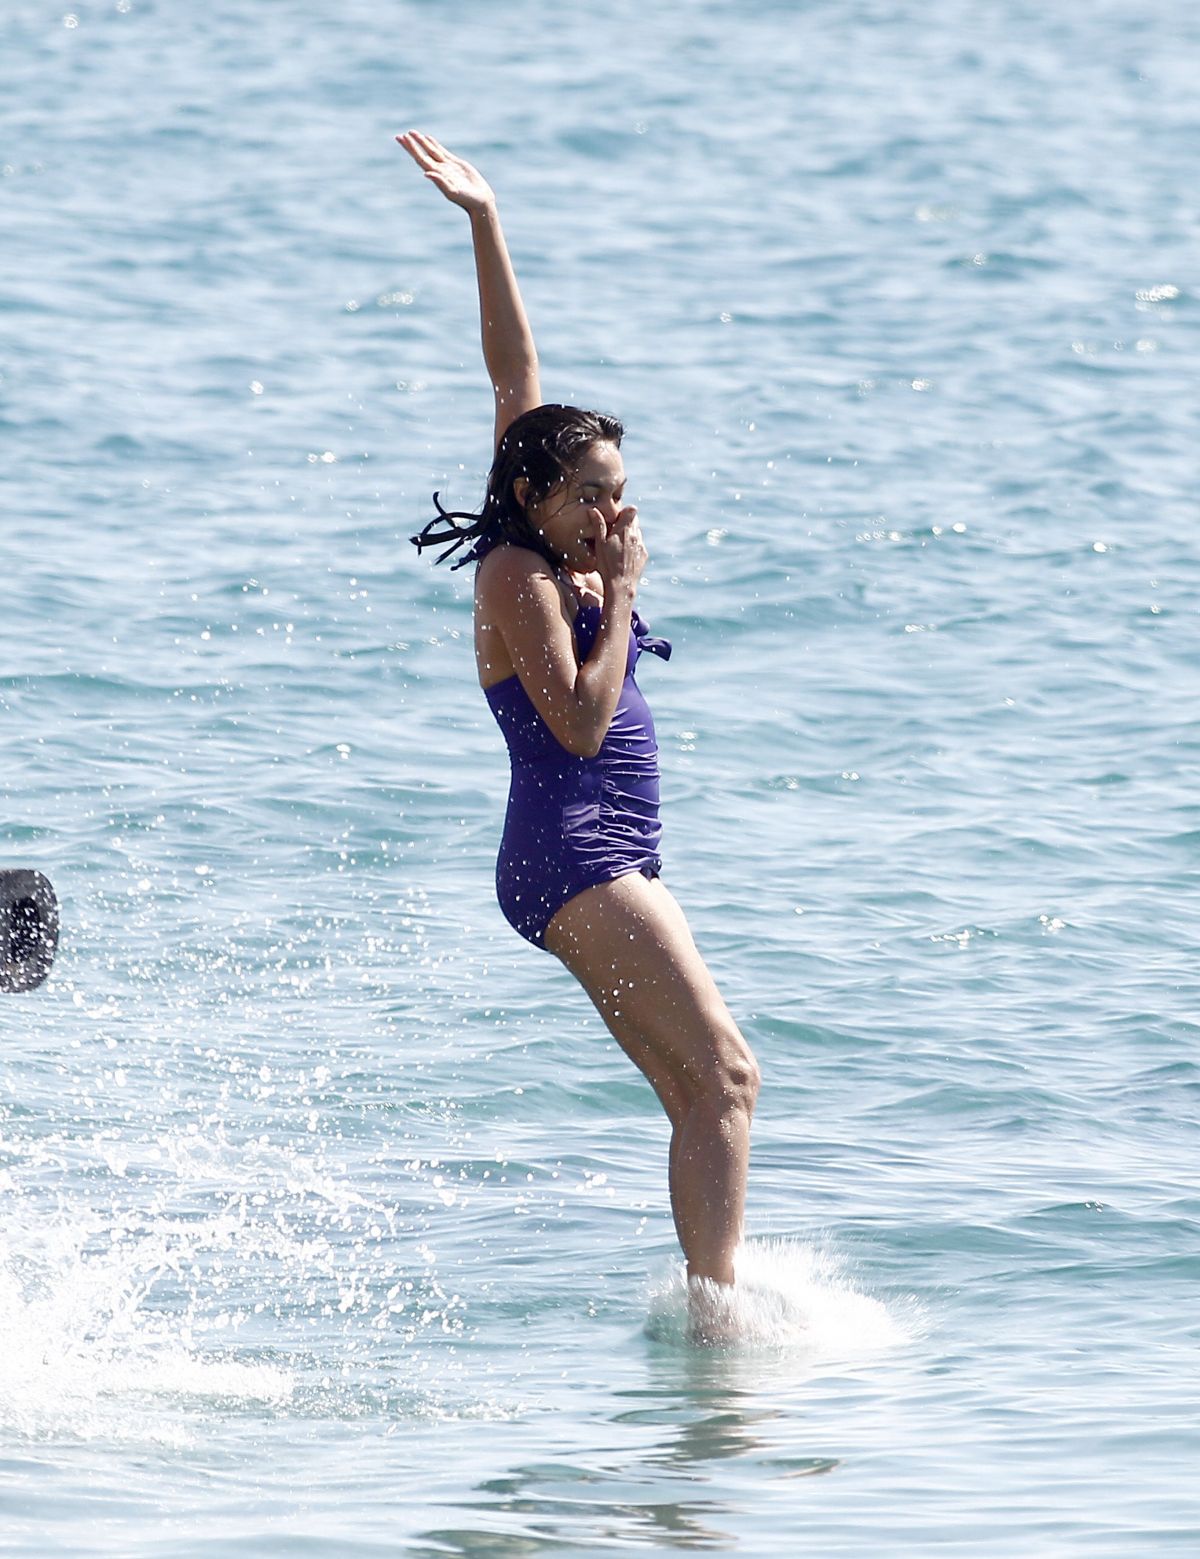 ROSARIO DAWSON in Swimsuit at a Beach in France.